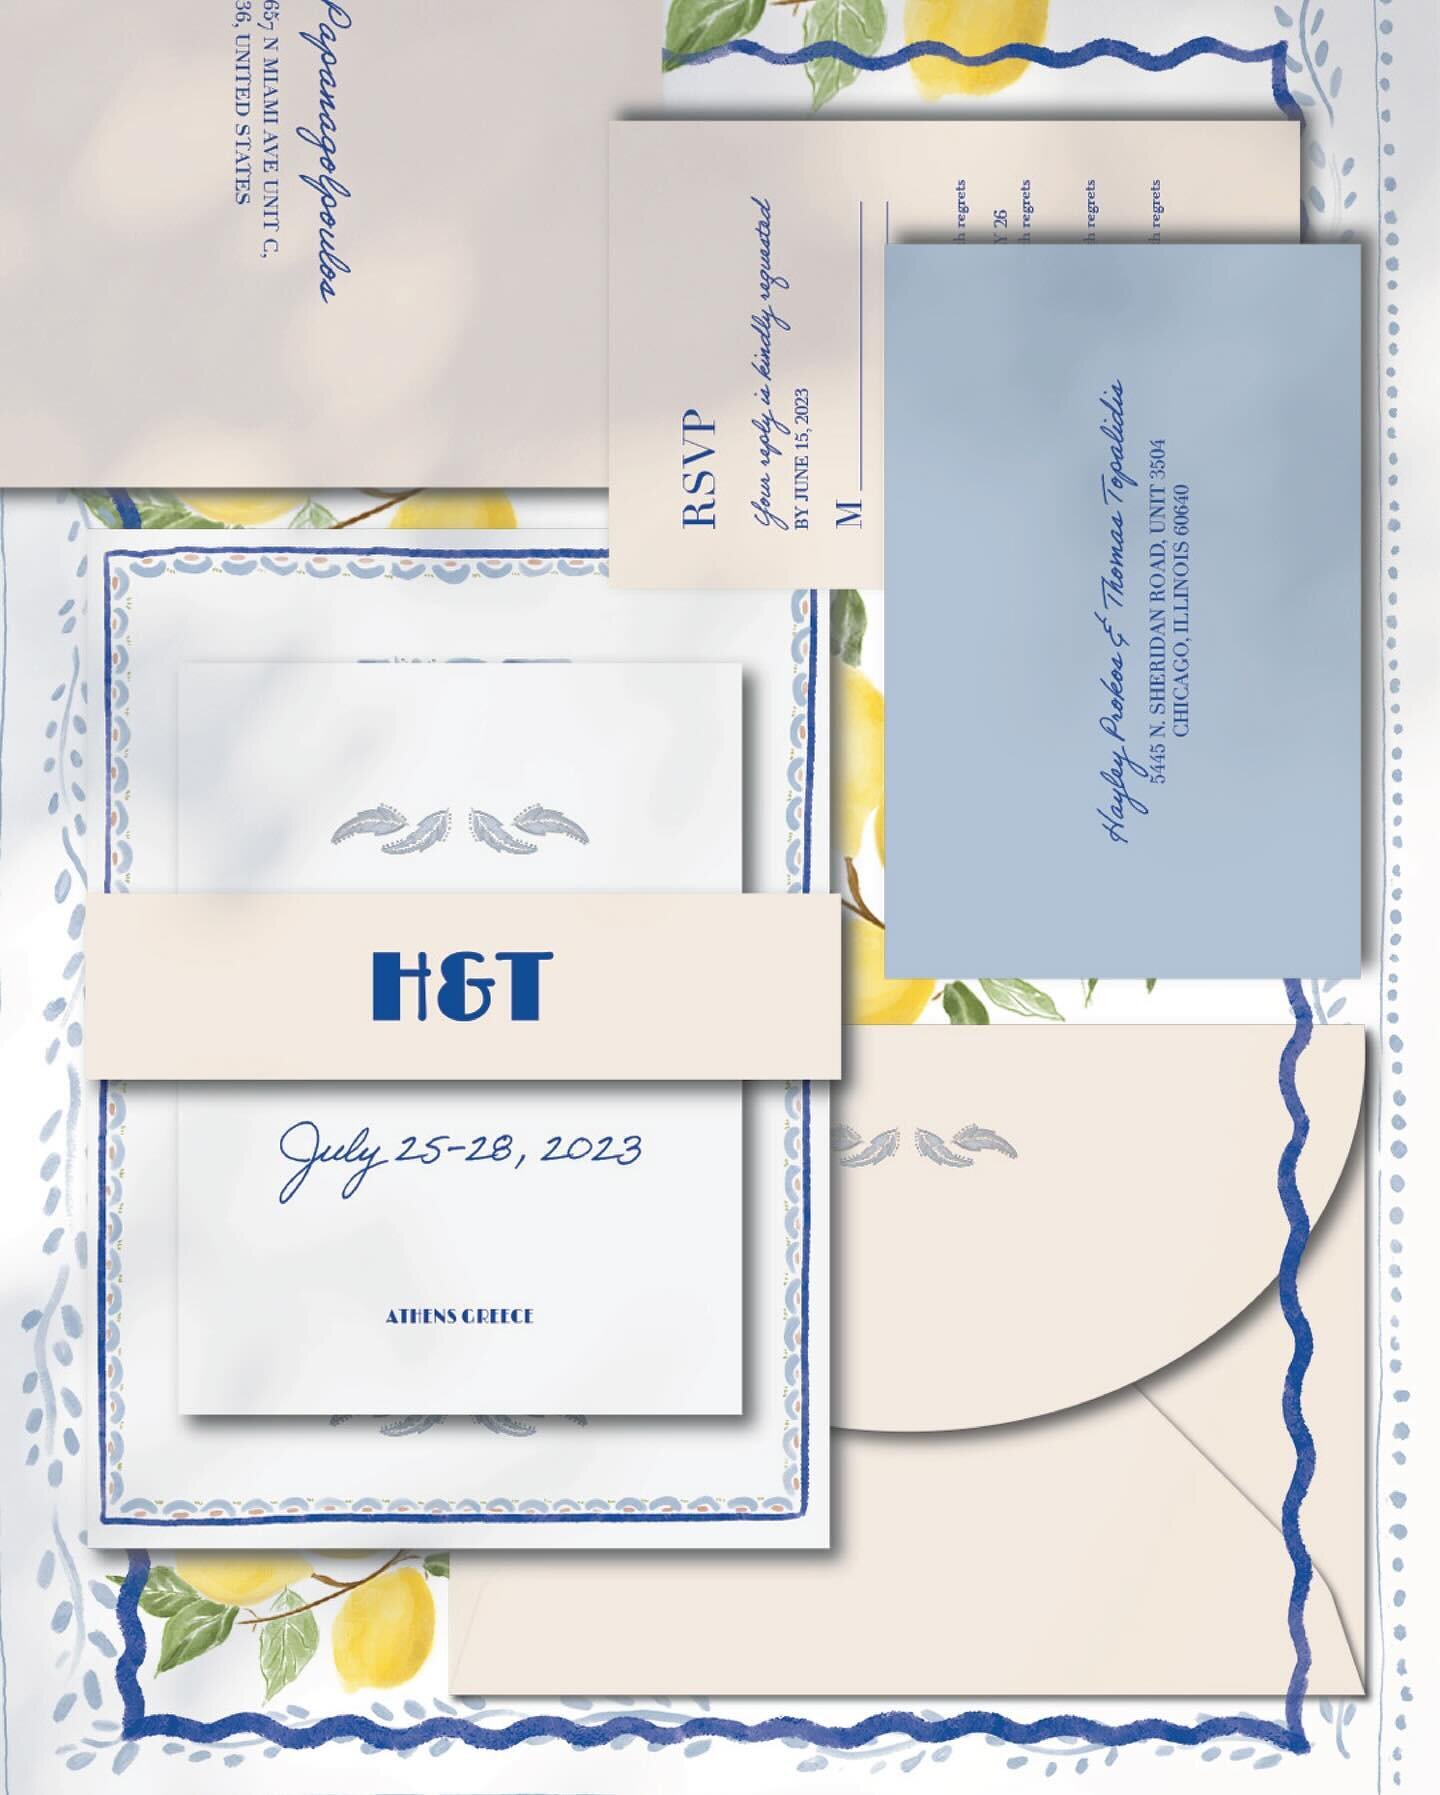 So much love went into designing this wedding invitation for H&amp;T&rsquo;s magical day - infused with Greek-inspired colors and vibes! 

Wedding Planning &amp; Styling: @meligreece 

#amstationery #weddingInvitation #weddingillustration #watercolou